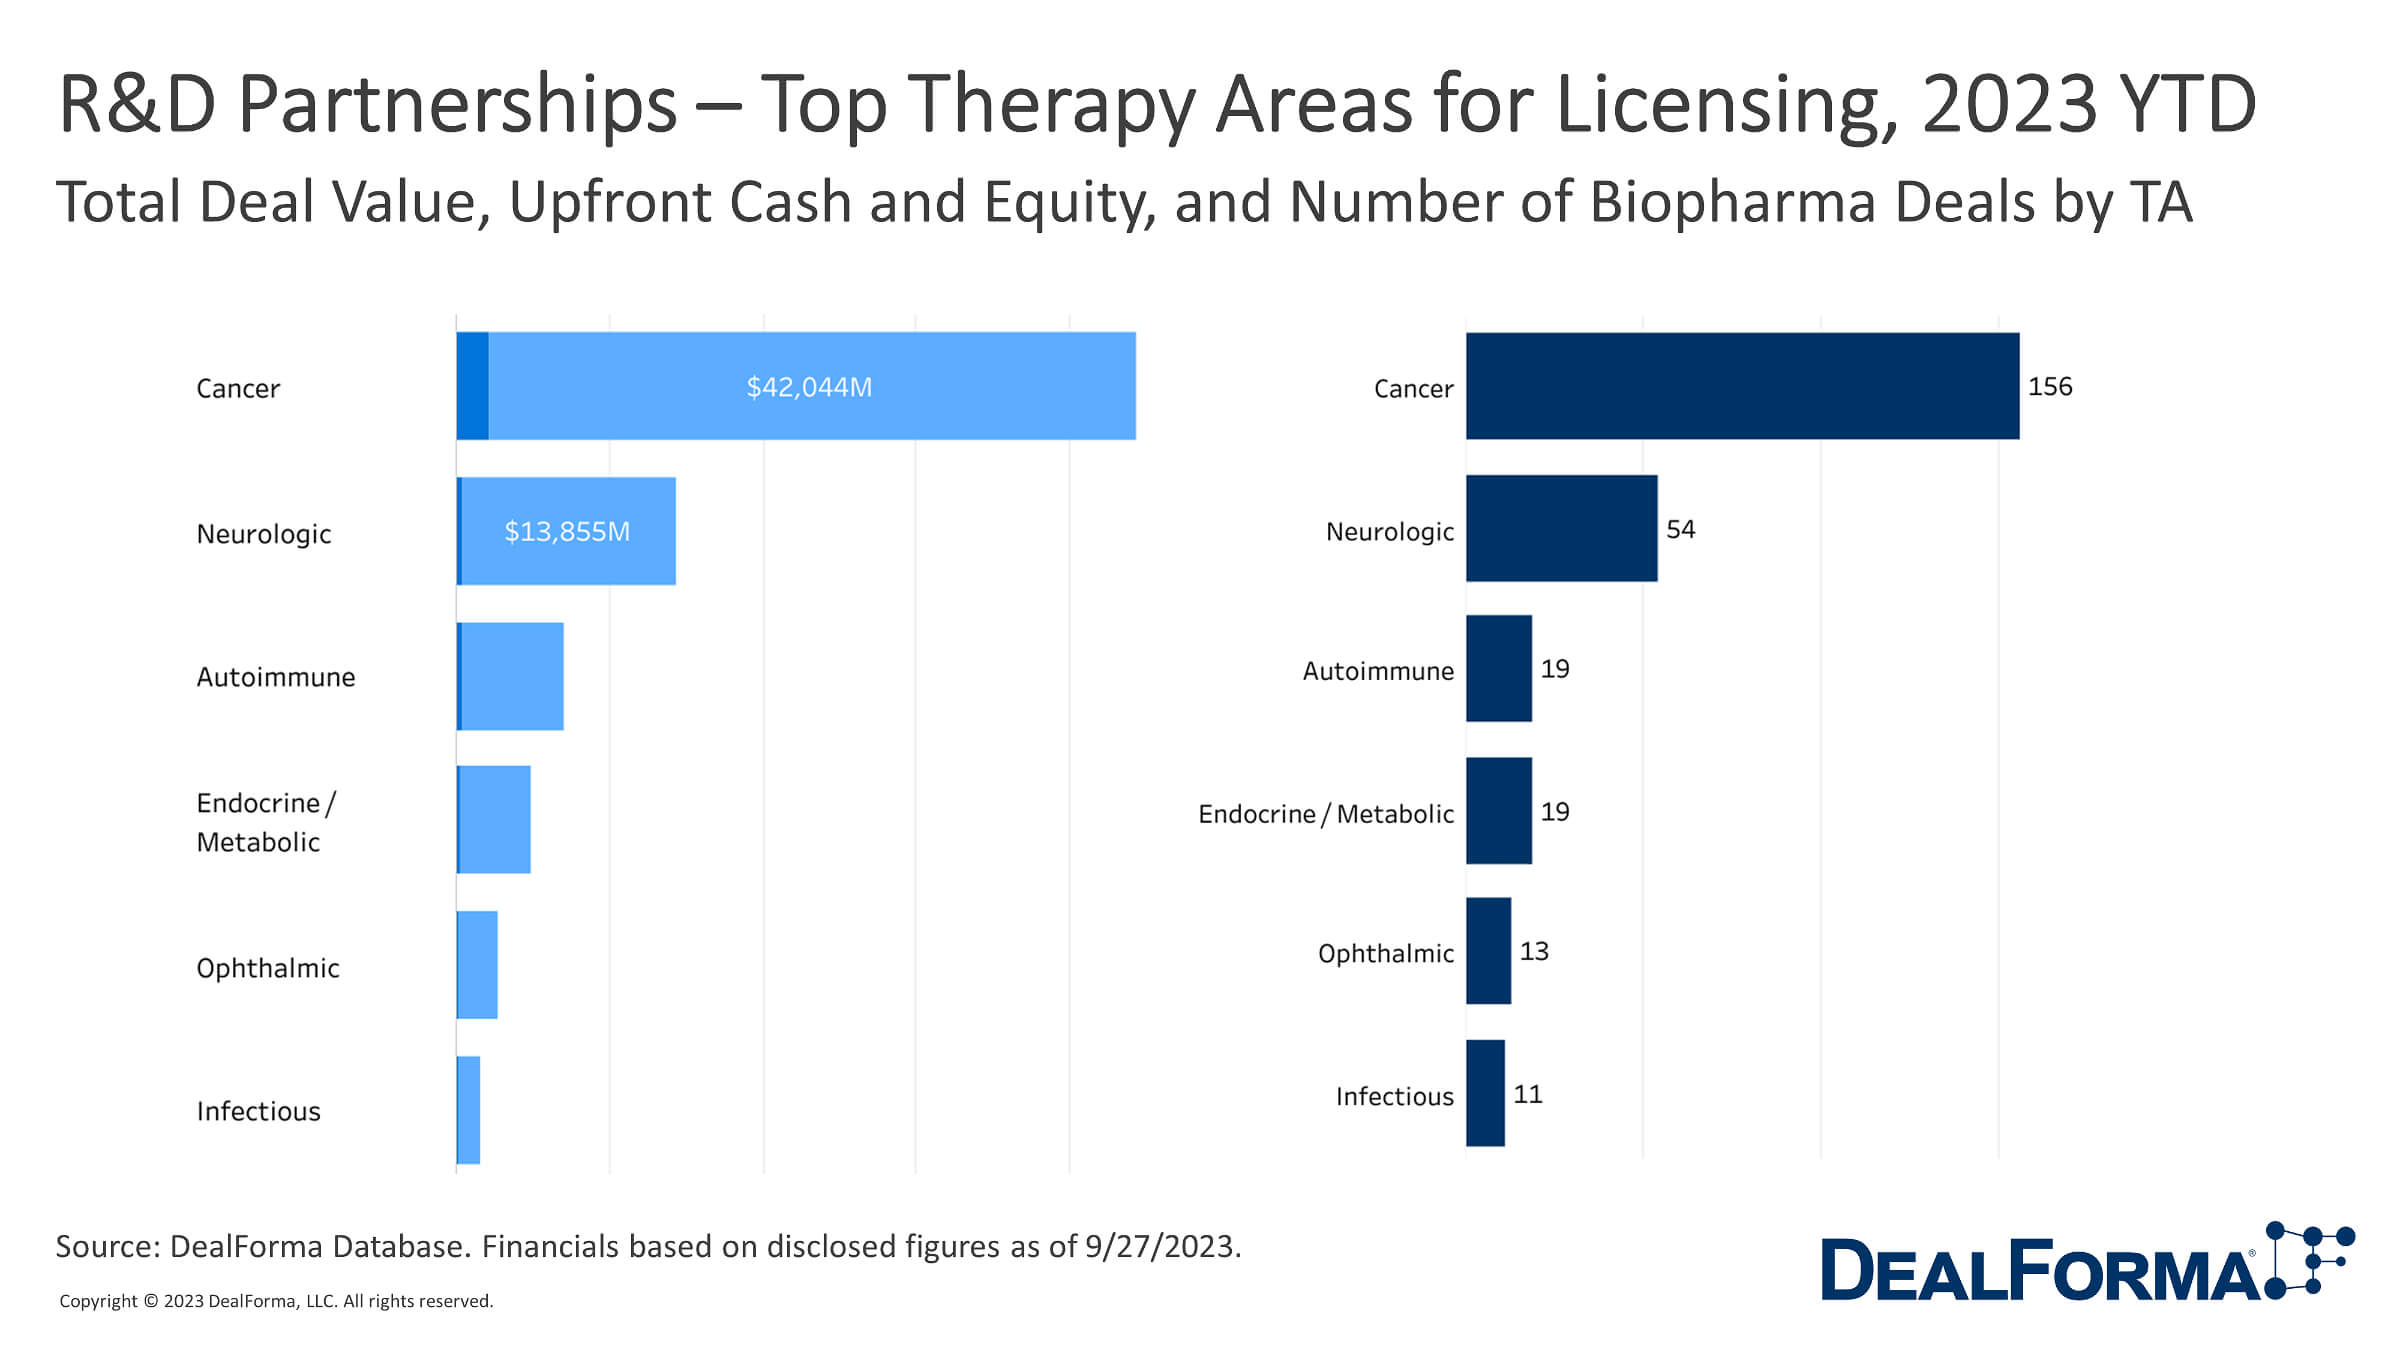 RD Partnerships Top Therapy Areas